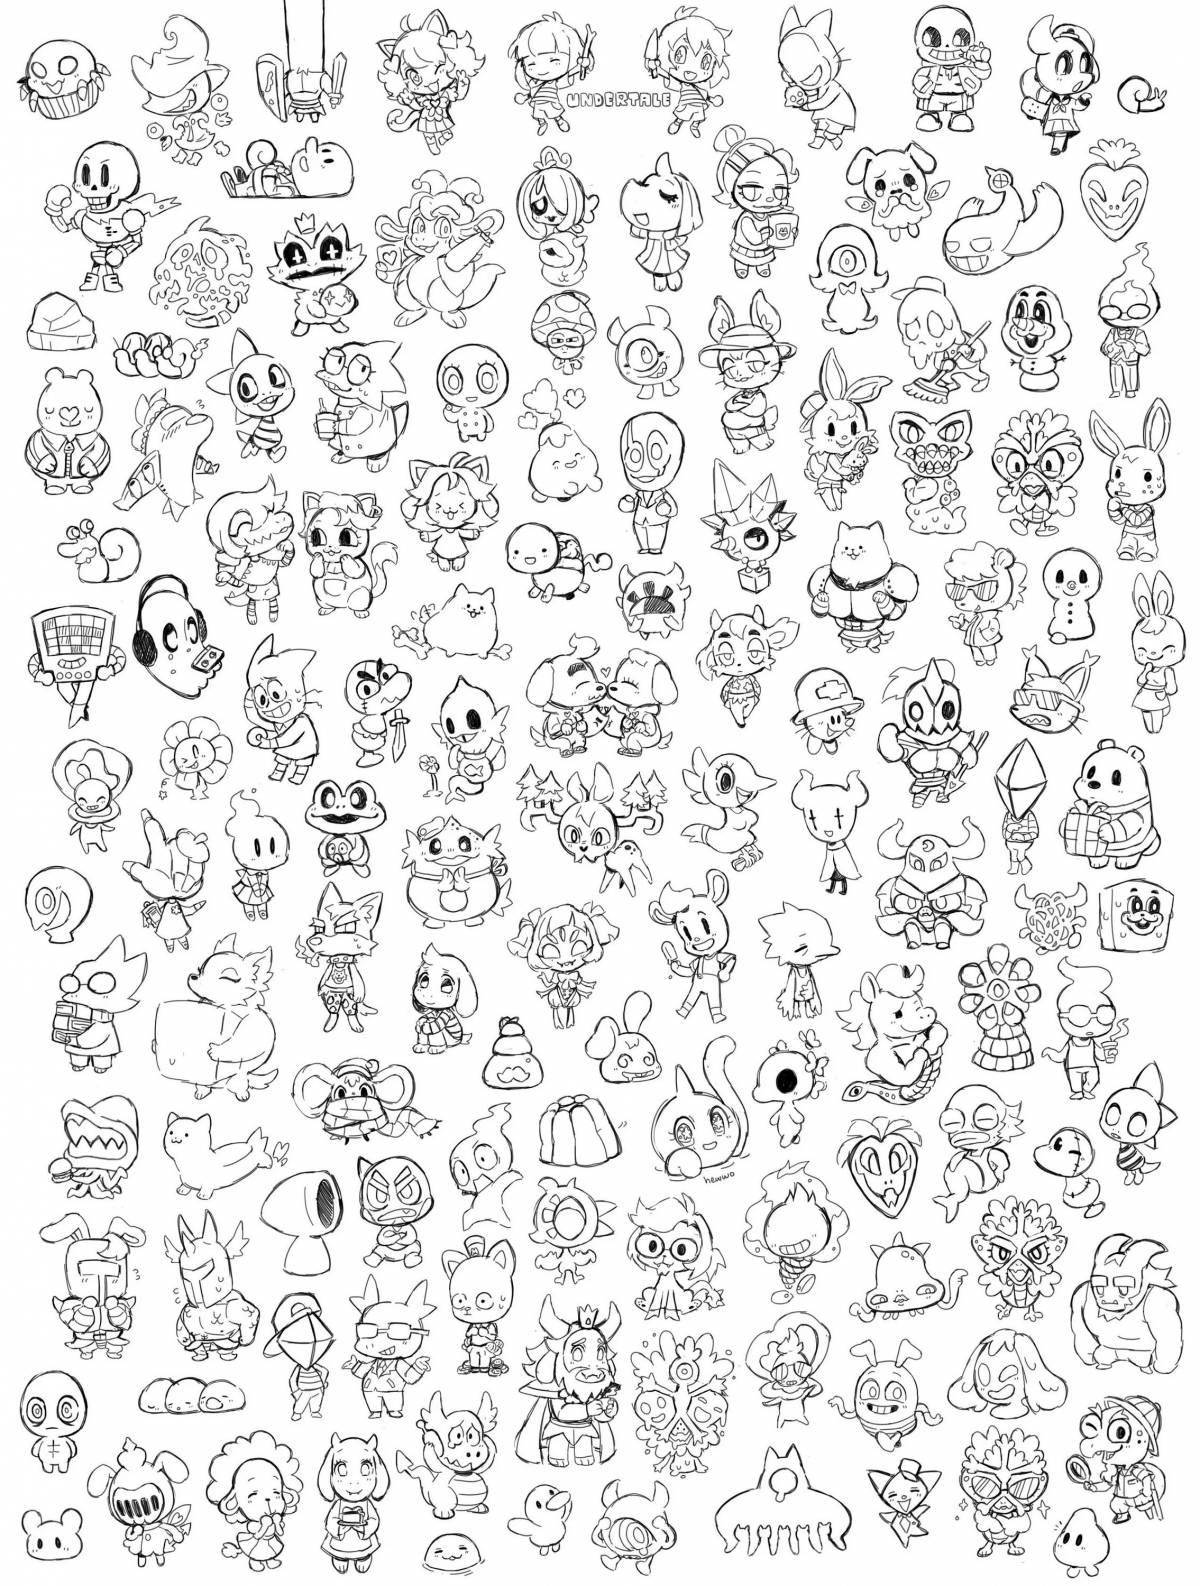 Many fun coloring pages